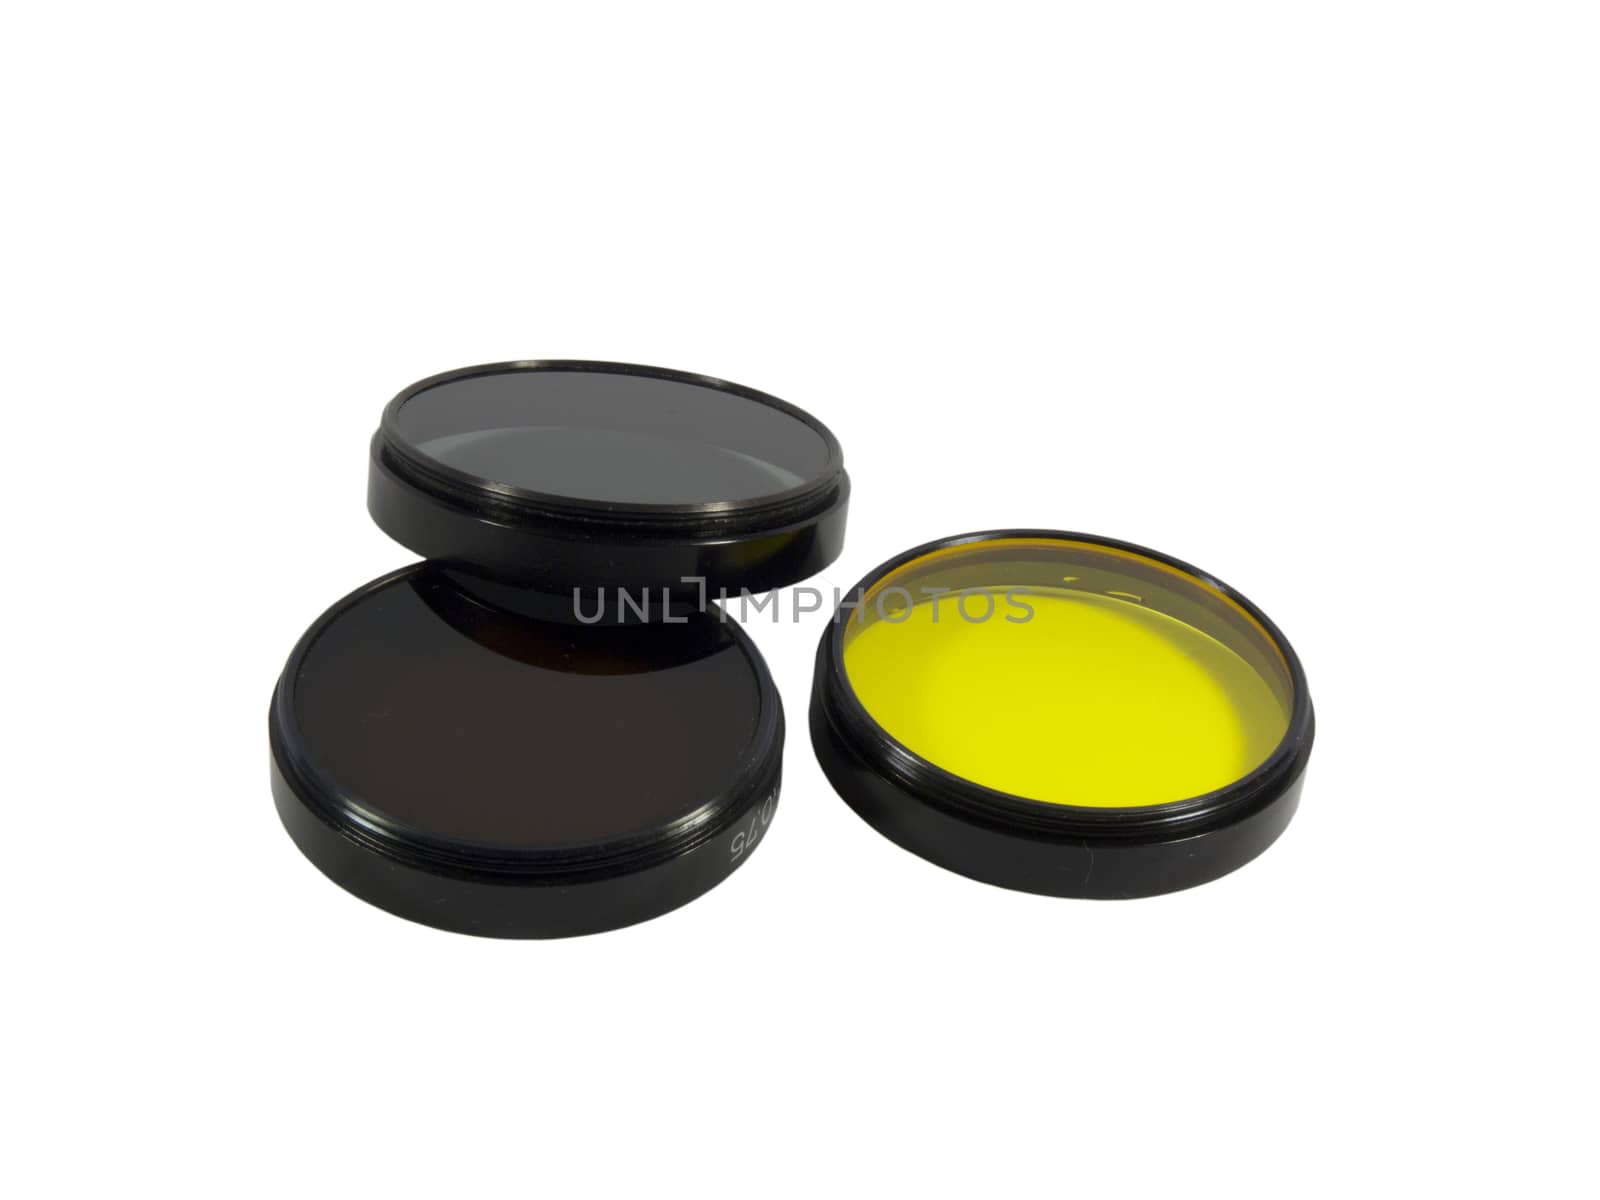 Filters for lenses isolated on a white background